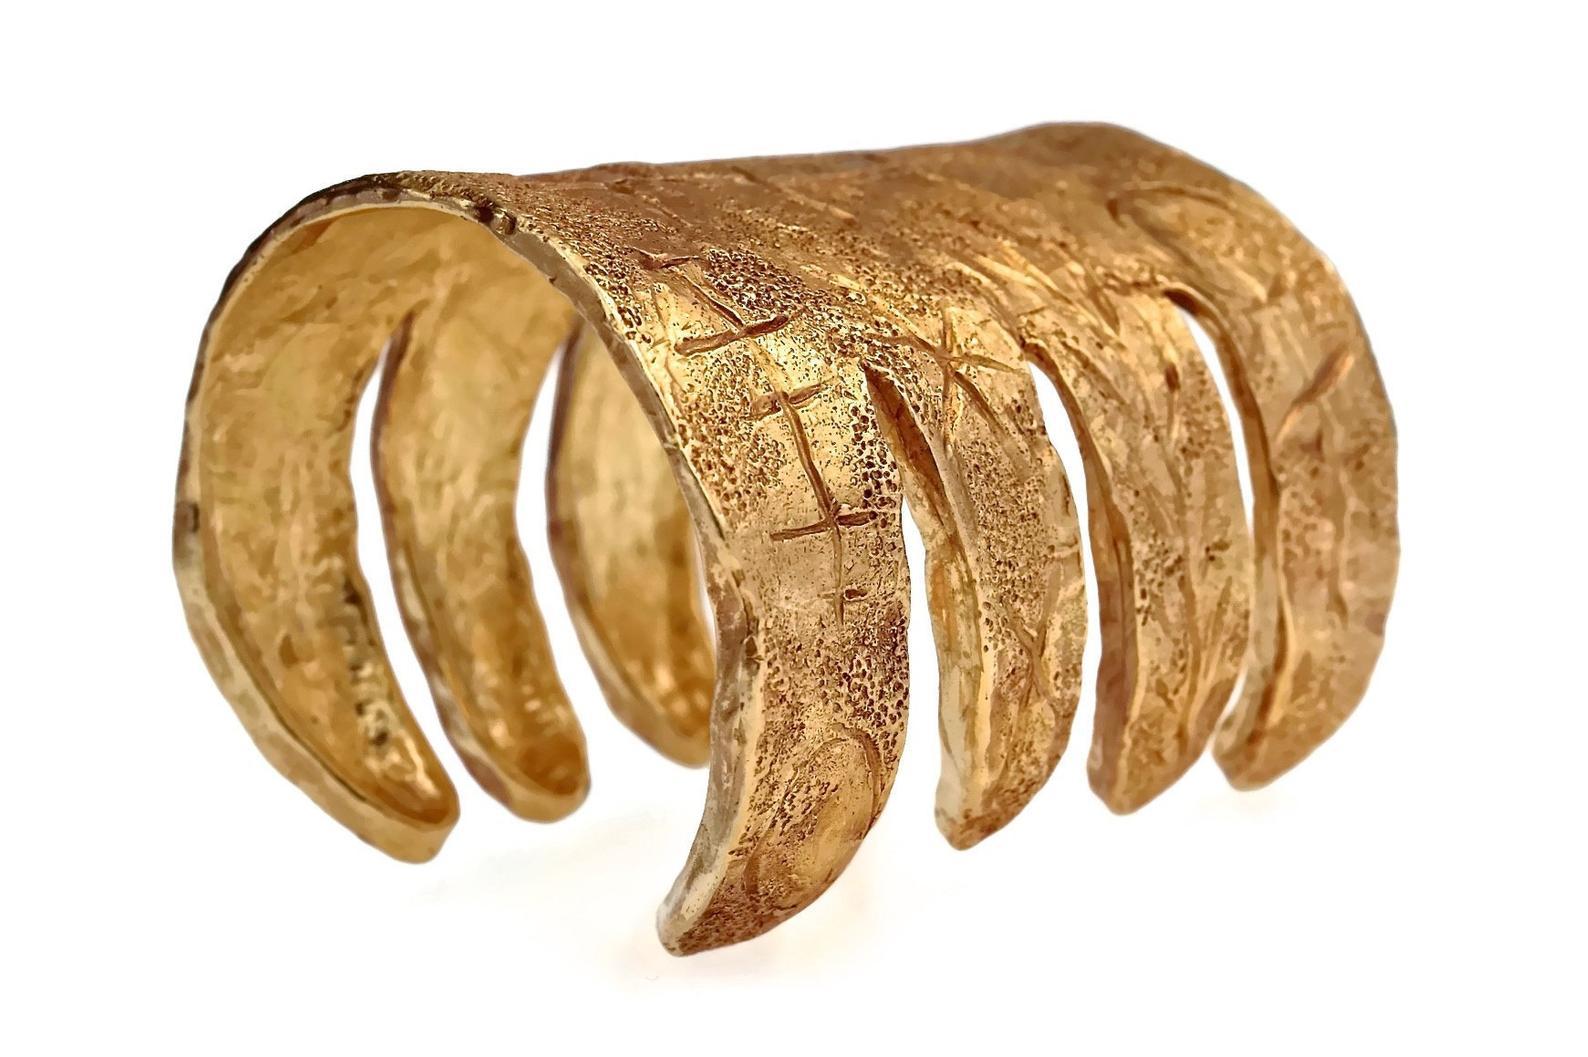 Vintage CHRISTIAN LACROIX Graffiti Claw Wide Cuff Bracelet

Measurements:
Height: 3/14 inches (8 cm)
Inner Circumference: 6.69 inches (17 cm)

Features:
- 100% Authentic CHRISTIAN LACROIX.
- Gilt textured wide cuff in gold tone.
- Wide gilt cuff